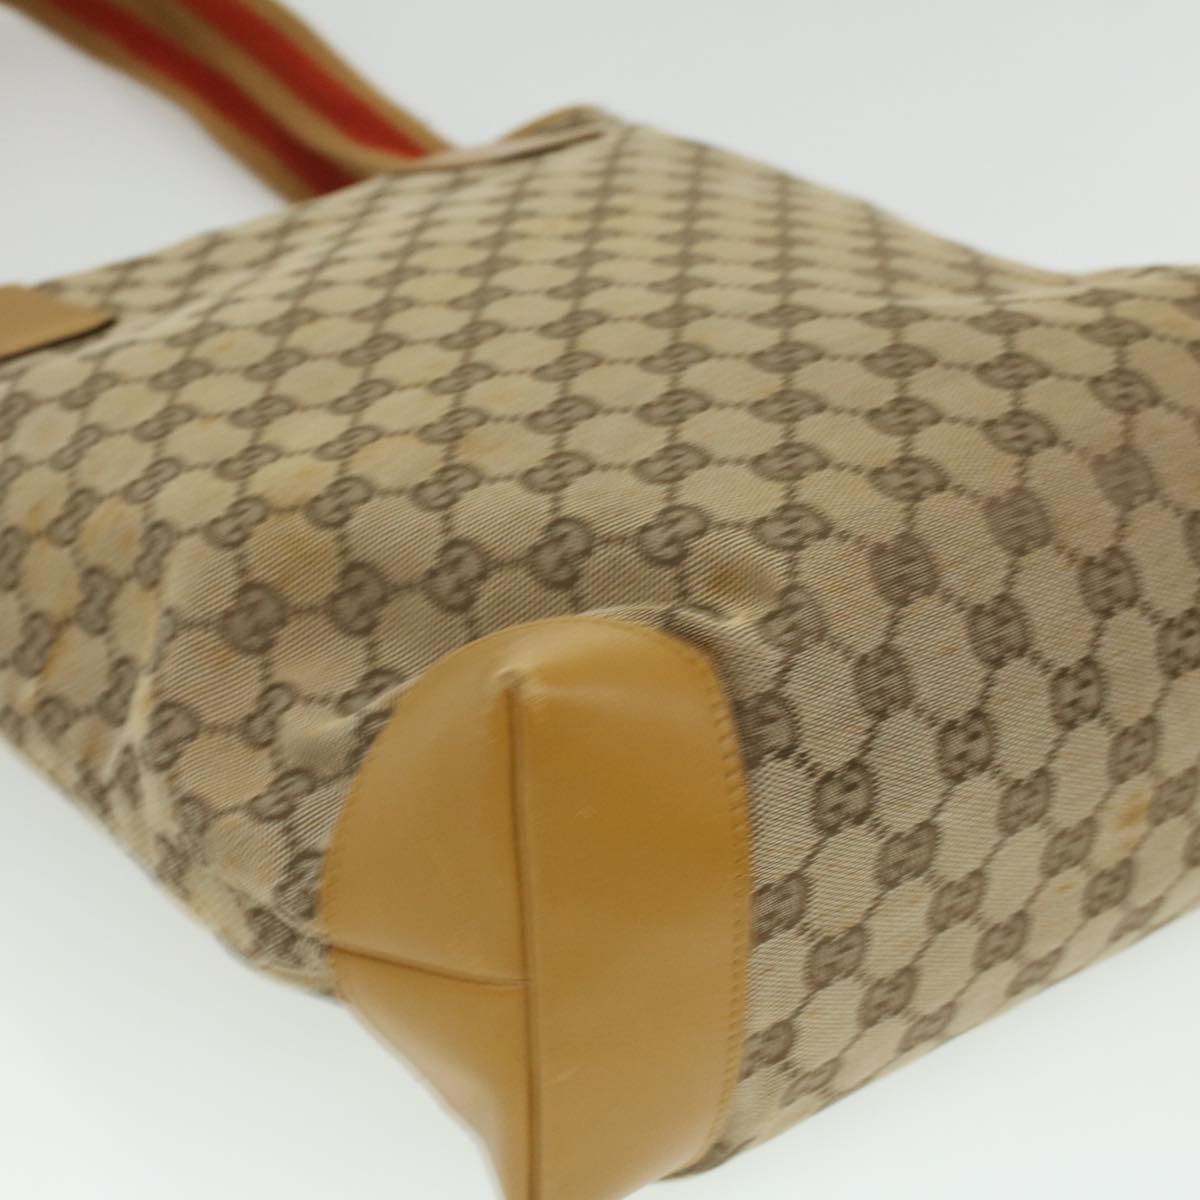 GUCCI Sherry Line GG Canvas Tote Bag Beige Red Brown Auth th3191